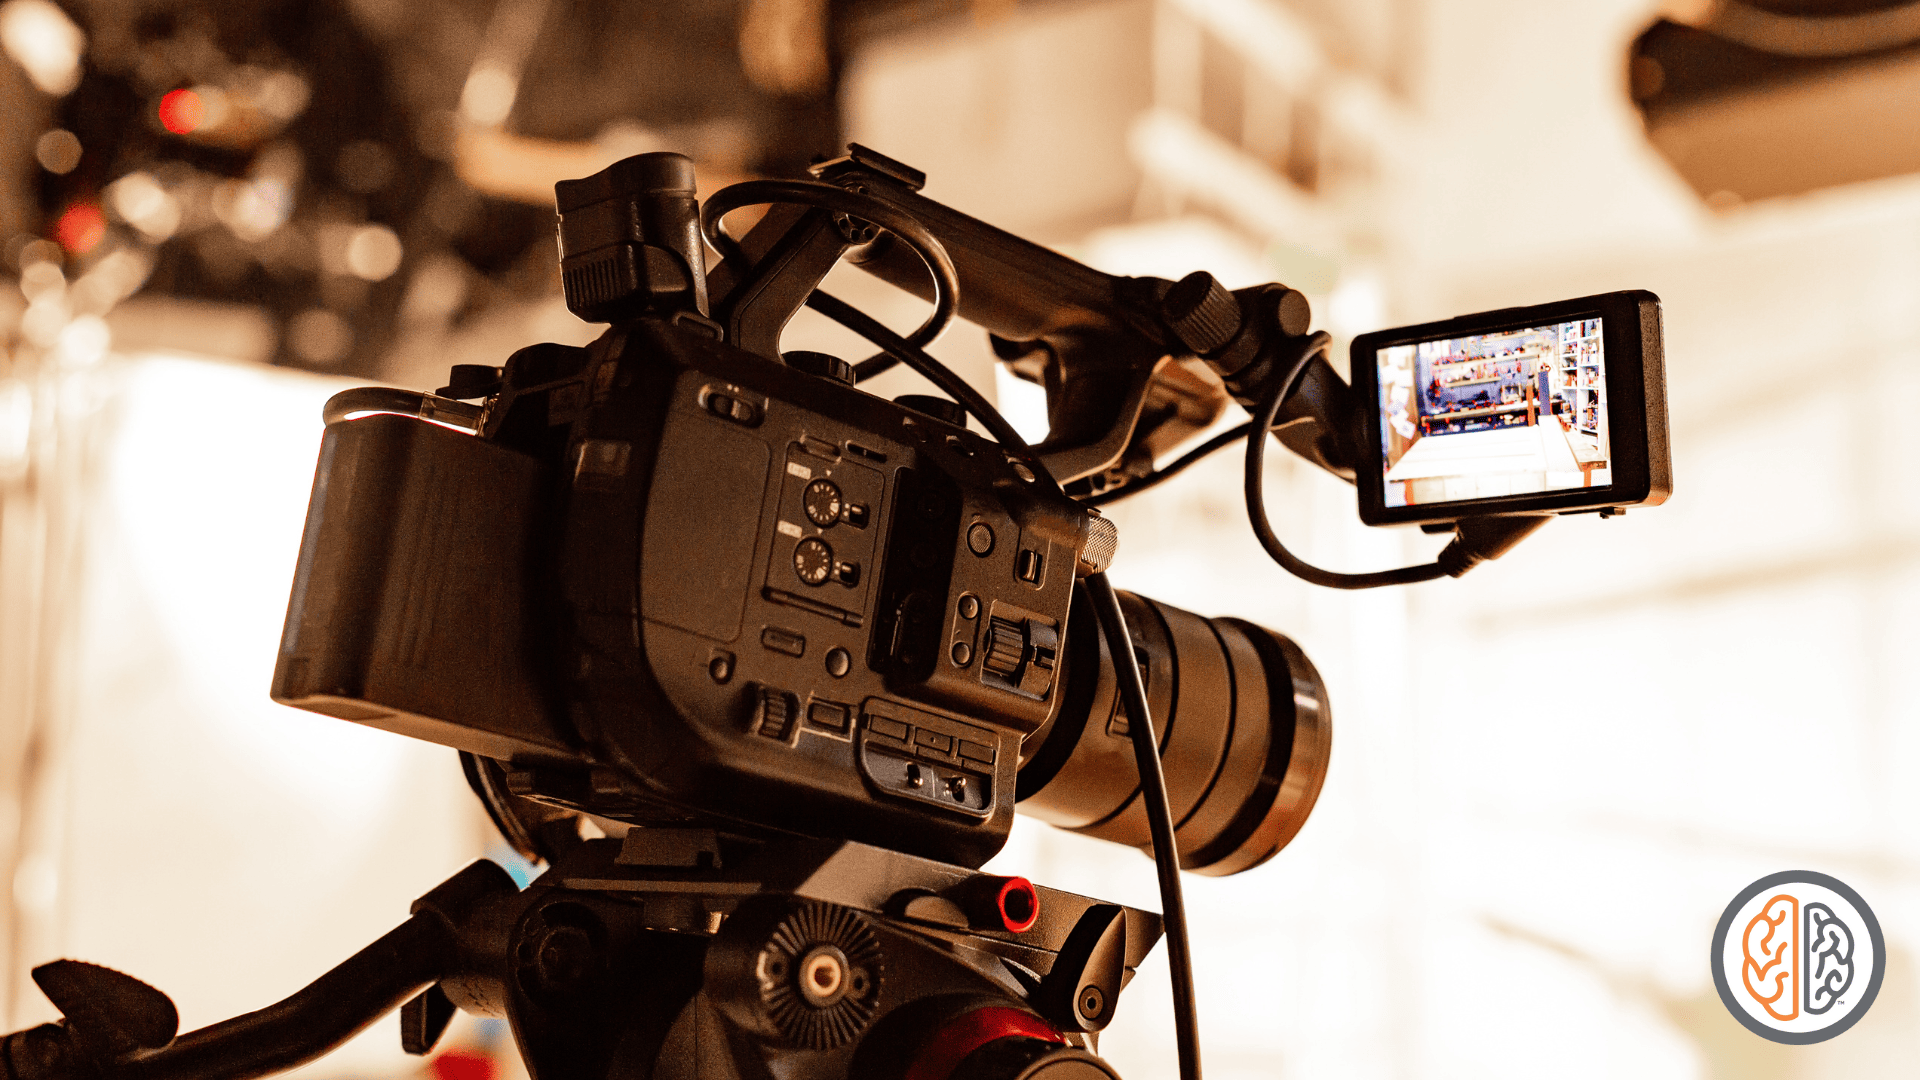 Elevating Your Business with Video Training